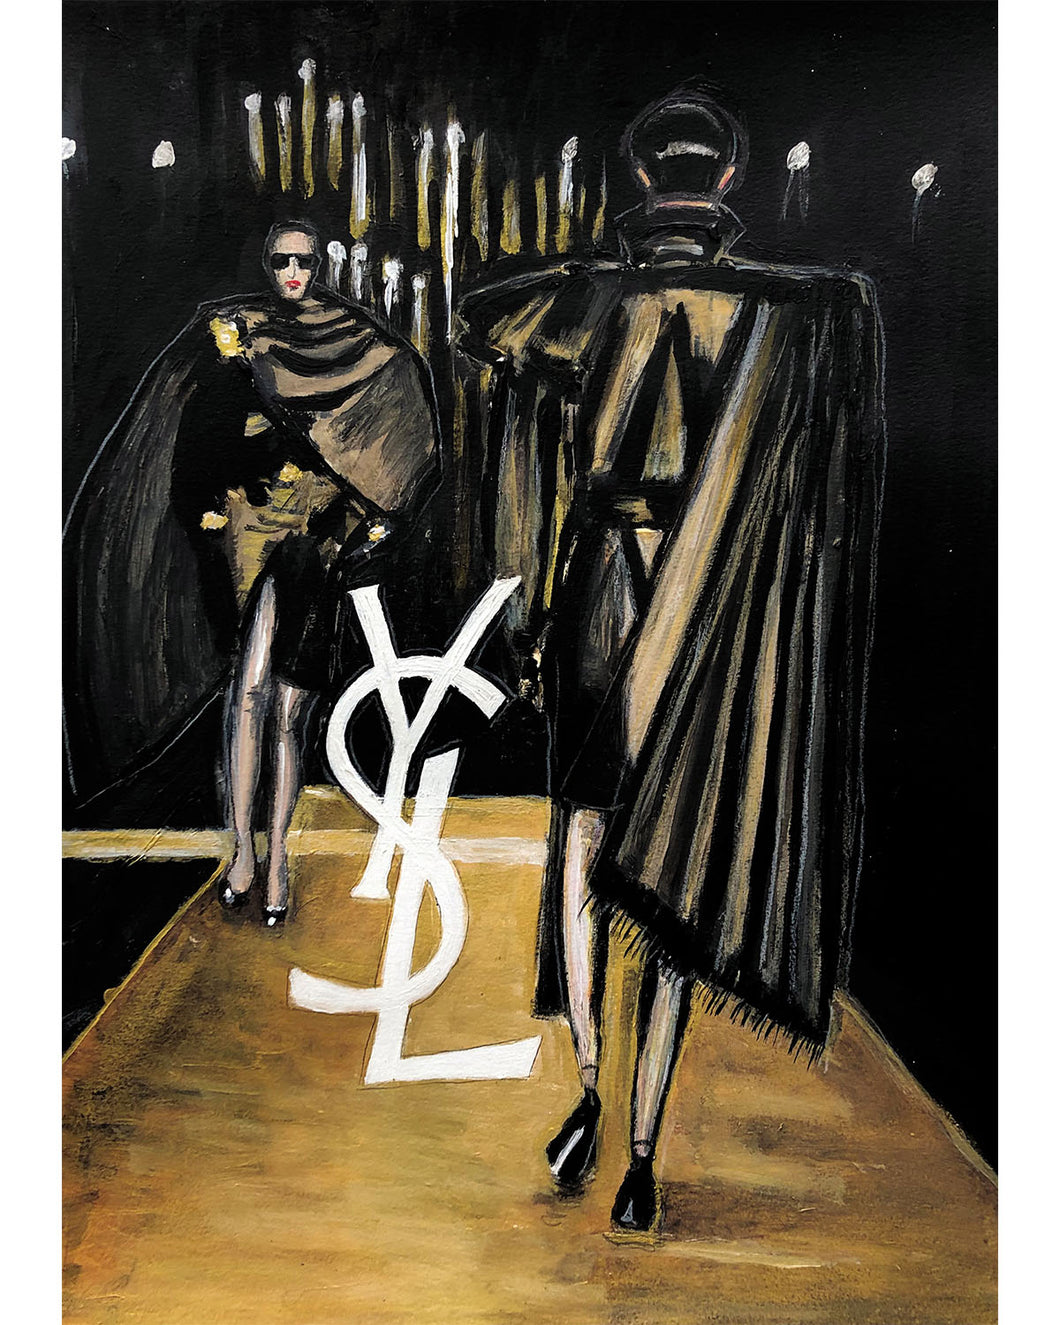 SAINT LAURENT - AW '23 illustration - two models on the runway (A3)